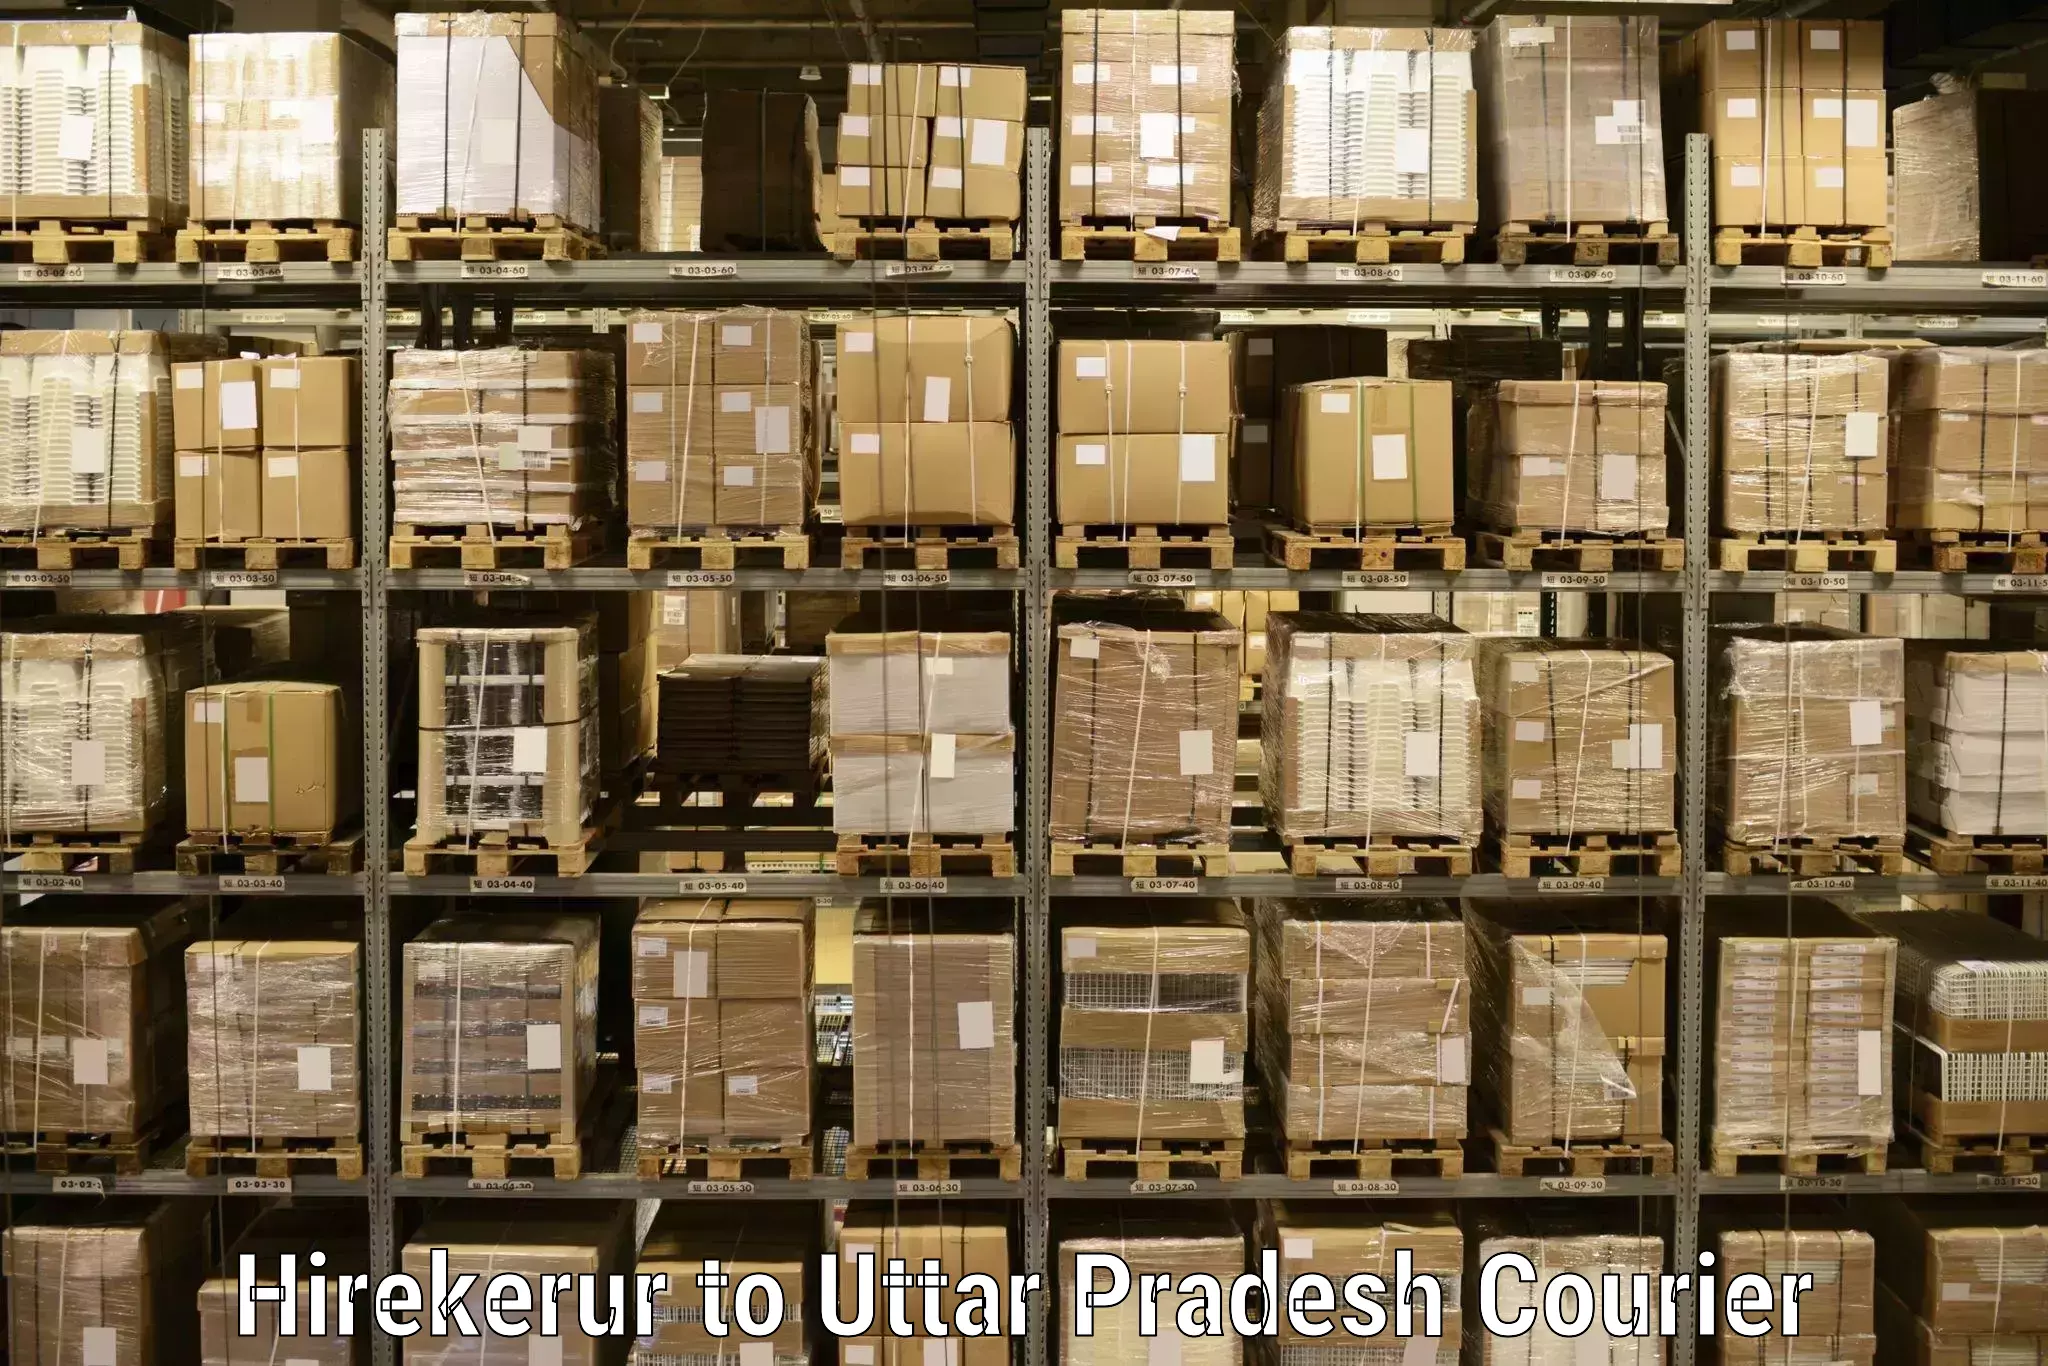 Supply chain delivery Hirekerur to Aligarh